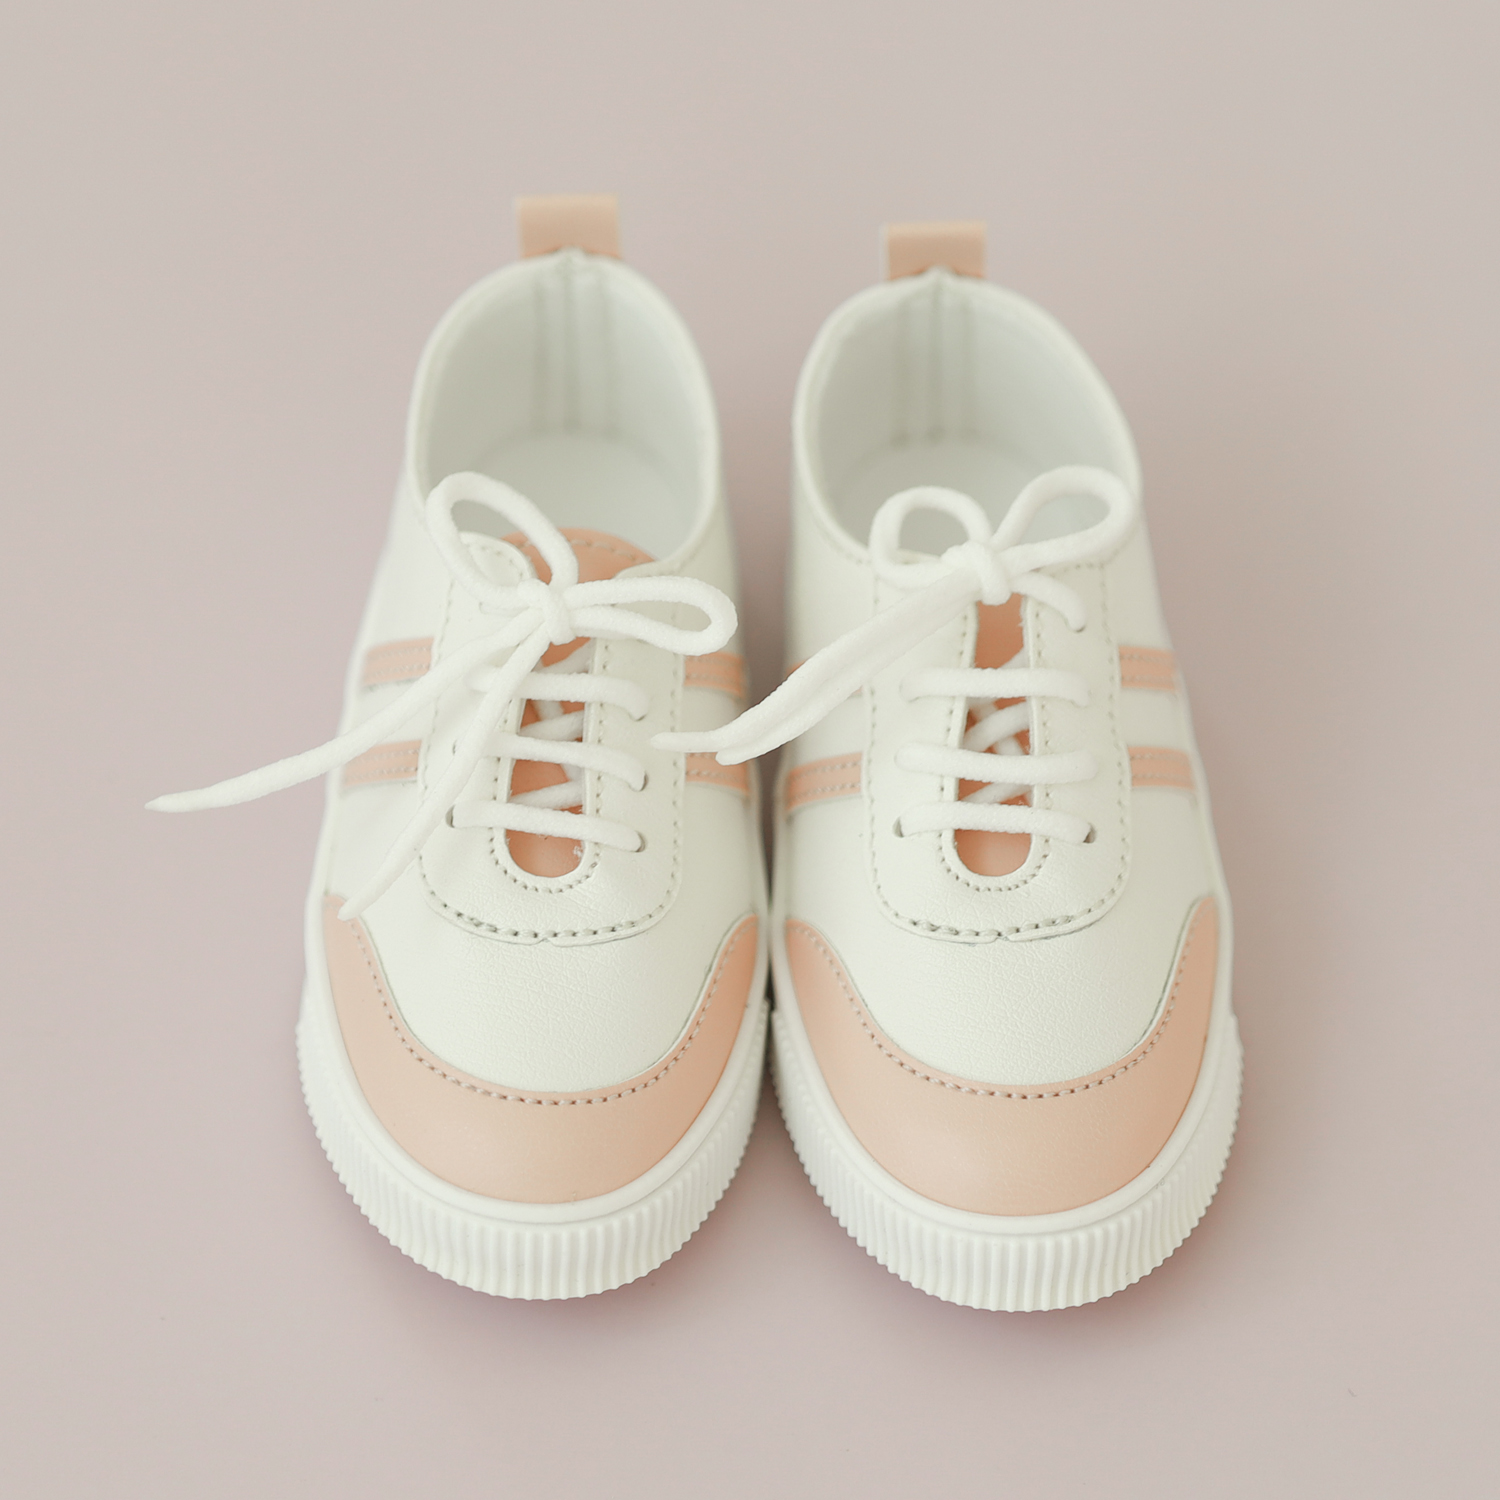 [SD9-16 Girl] Line sneakers. Pink